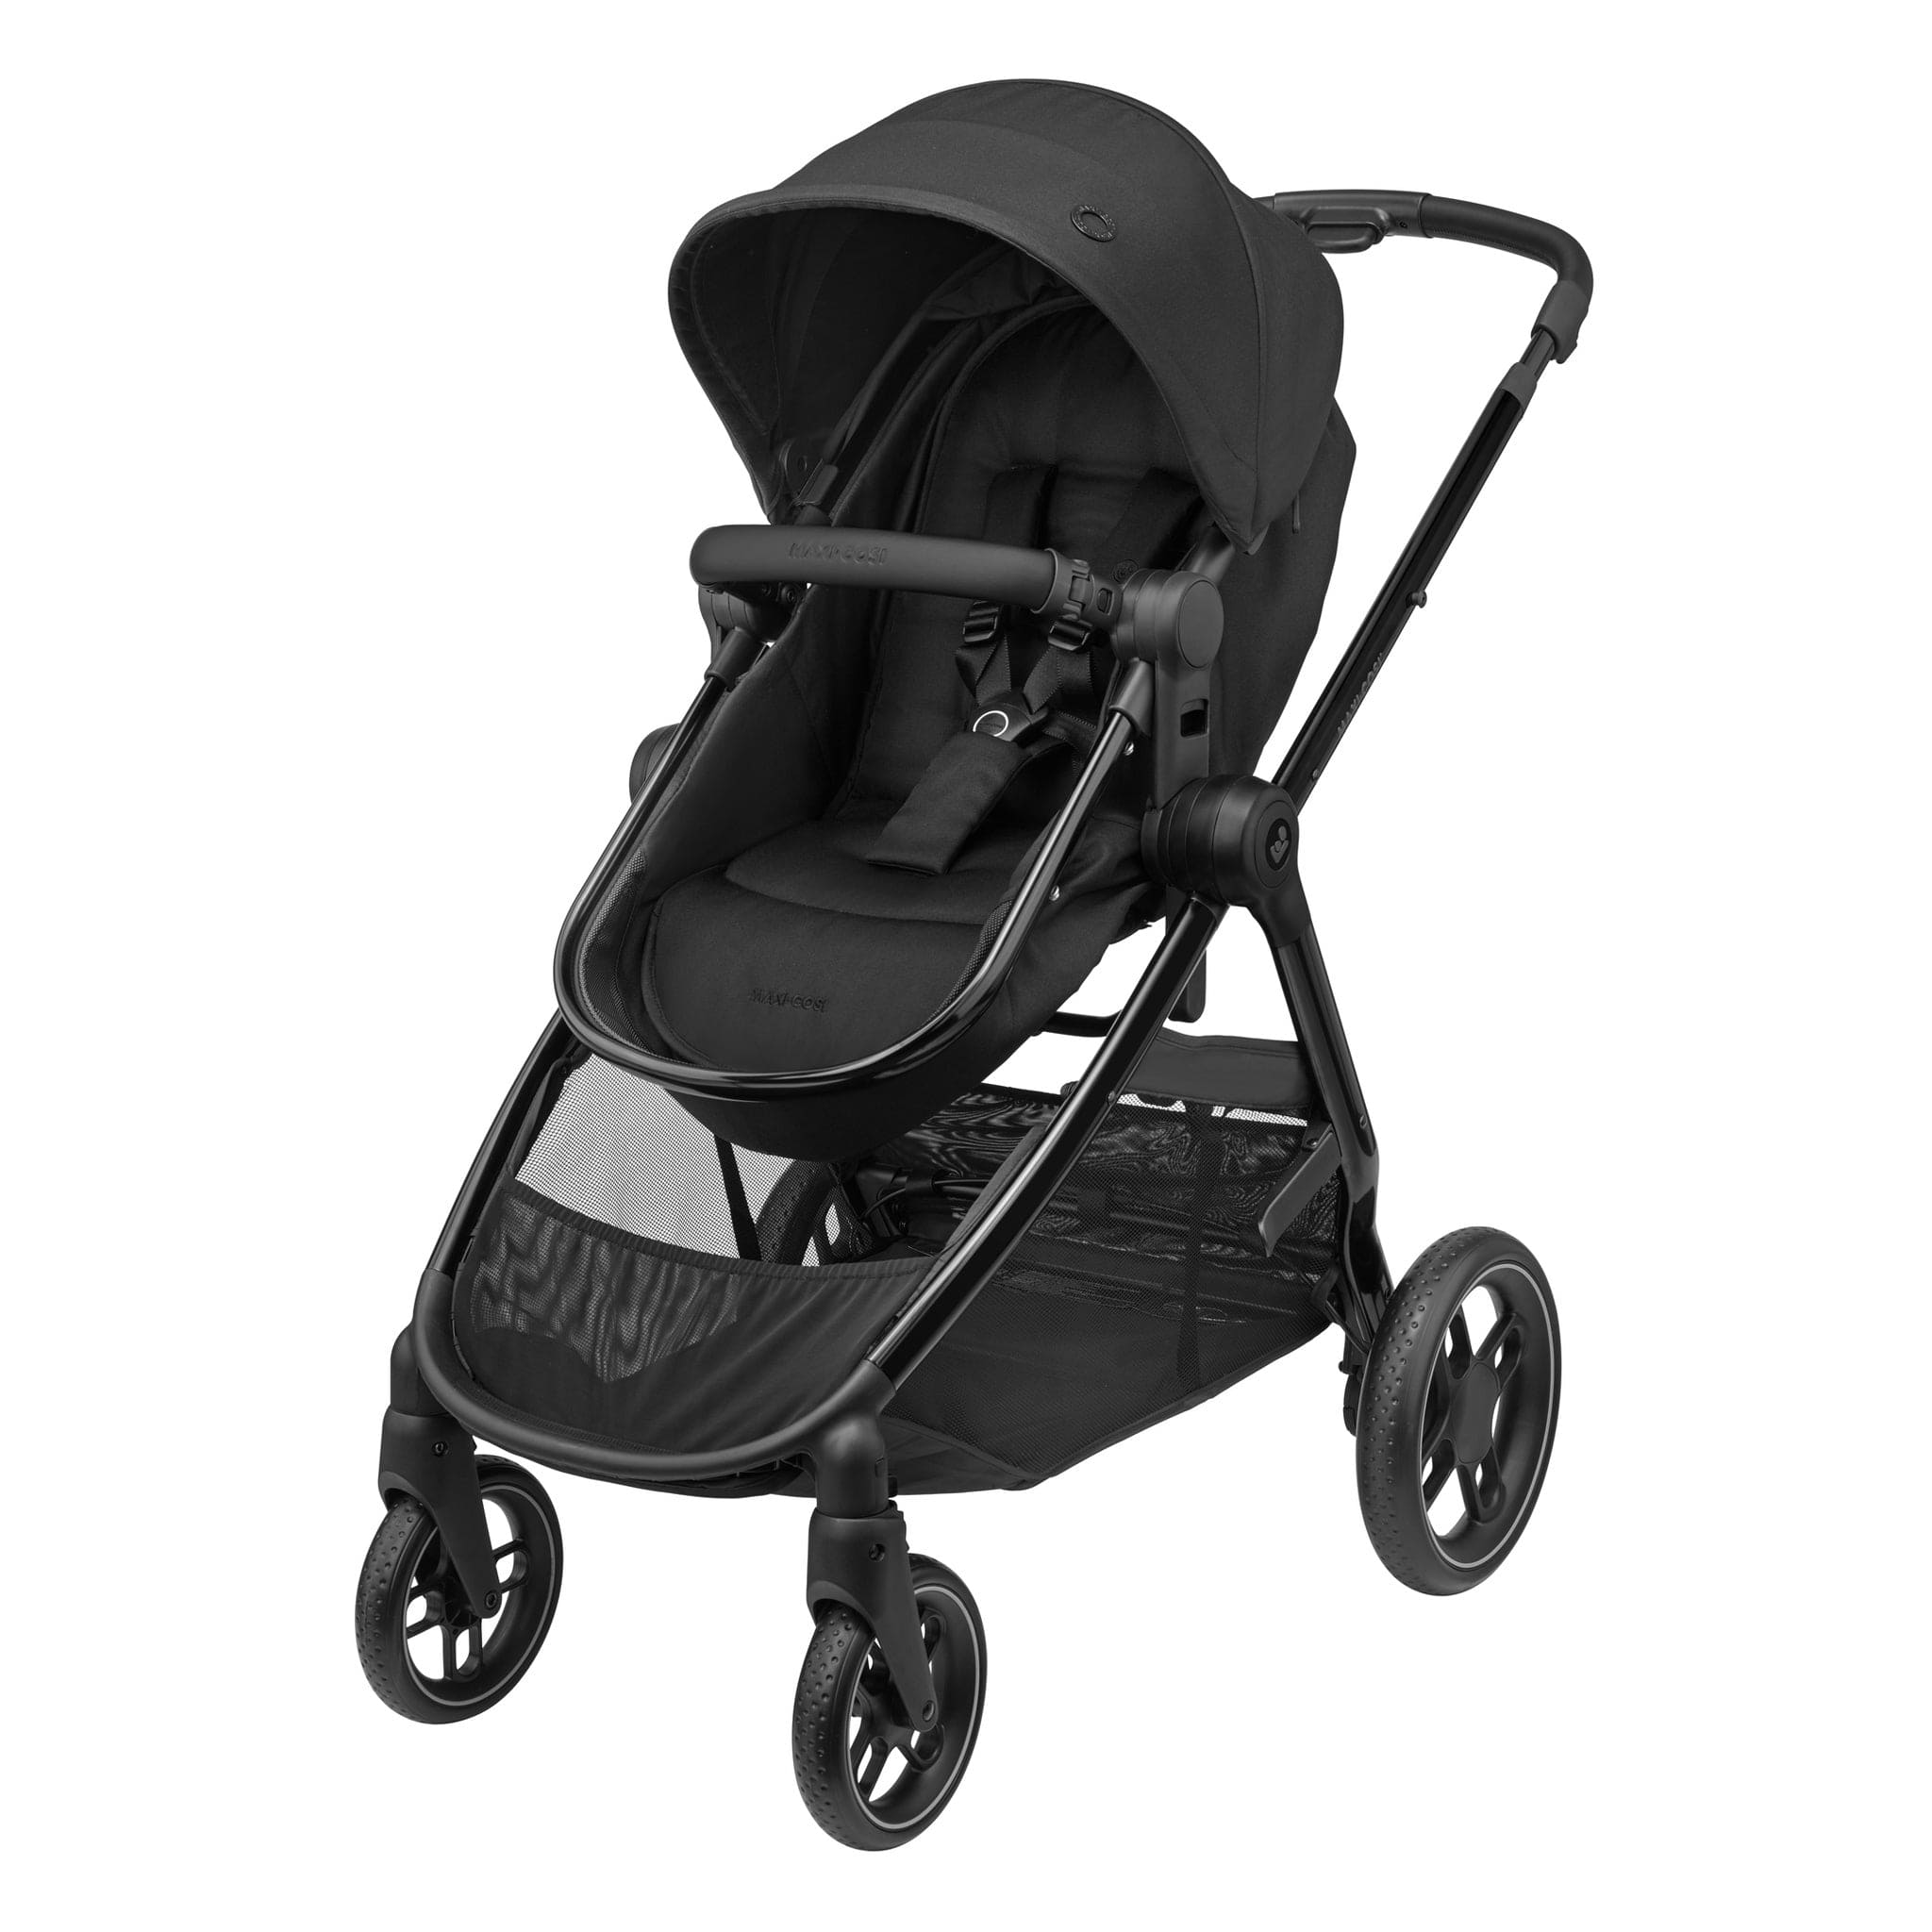 Maxi-Cosi Zelia Luxe with Cabriofix i-Size & Base Travel System in Twillic Black Travel Systems 11071-TWI-BLK 8712930175056